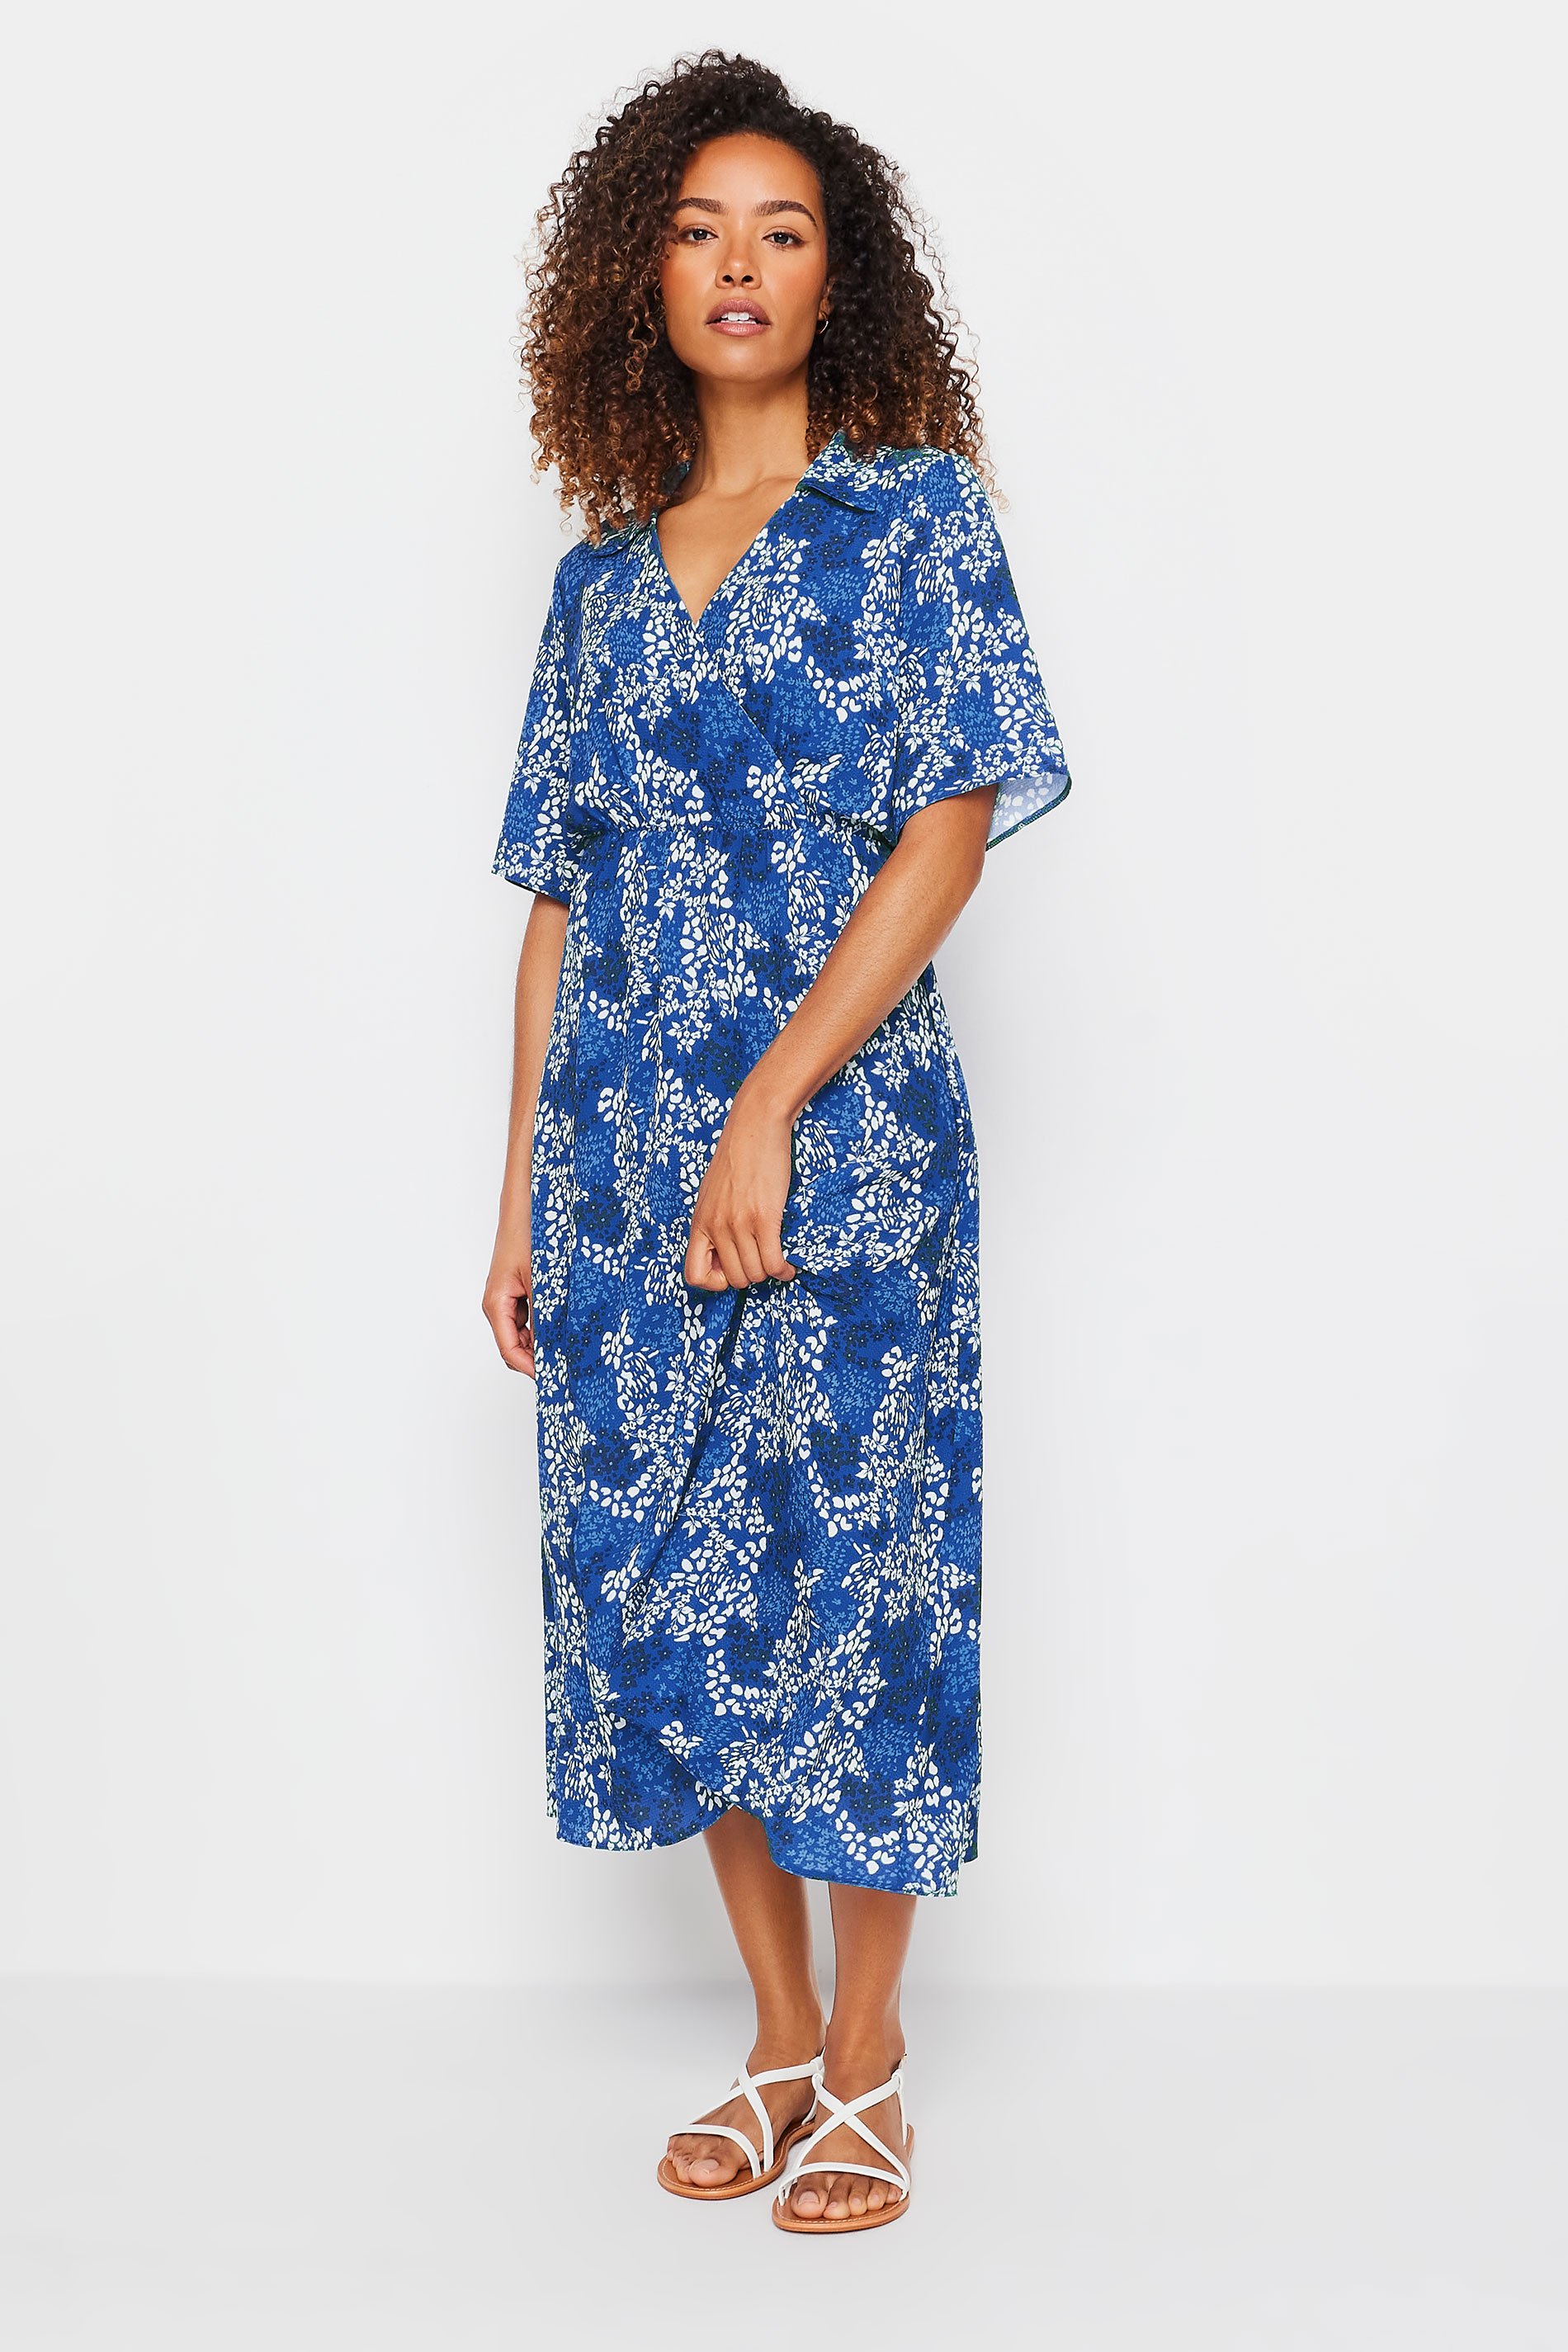 M&Co Blue Abstract Print Midaxi Dress | M&Co 1